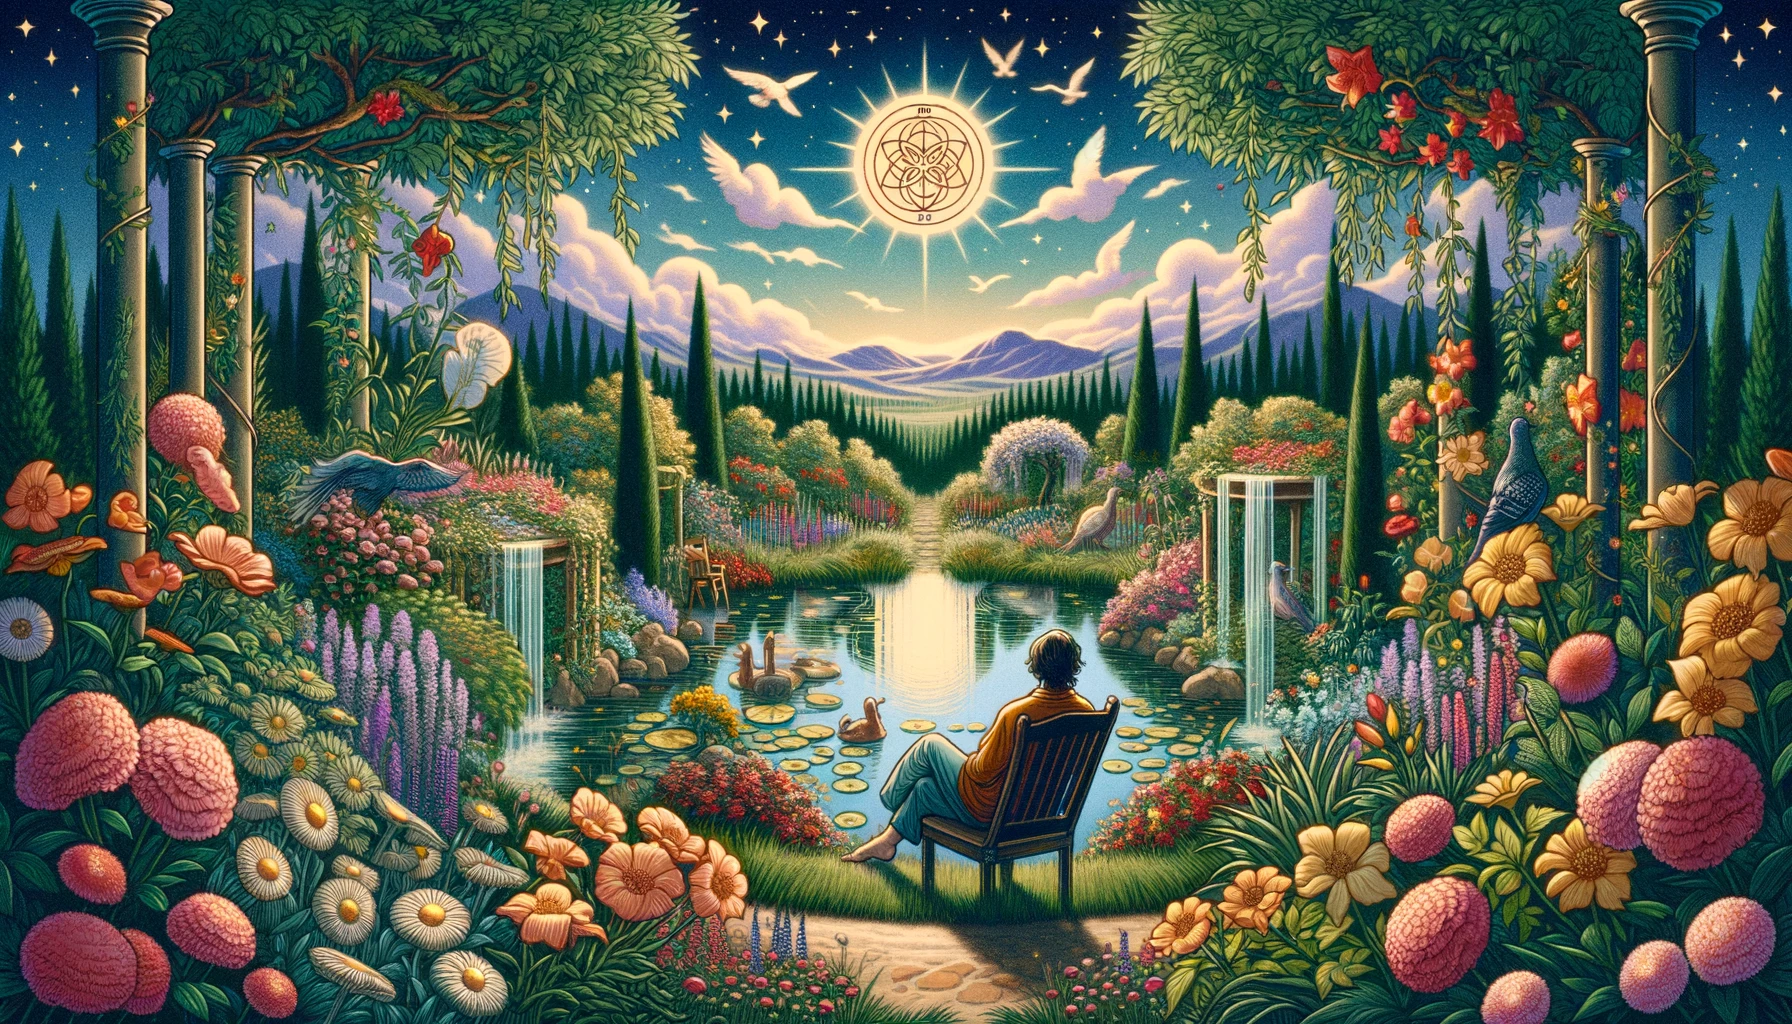 The image shows an individual seated peacefully in a lush, vibrant garden, surrounded by blooming flowers and lush greenery. They have a serene expression on their face, radiating contentment and inner peace. The scene evokes a sense of tranquility and solitude, symbolizing emotional independence and personal fulfillment. The individual appears comfortable and at ease in their own company, embodying the themes of self-sufficiency, prosperity, and the joy of enjoying life's luxuries achieved through their own efforts.